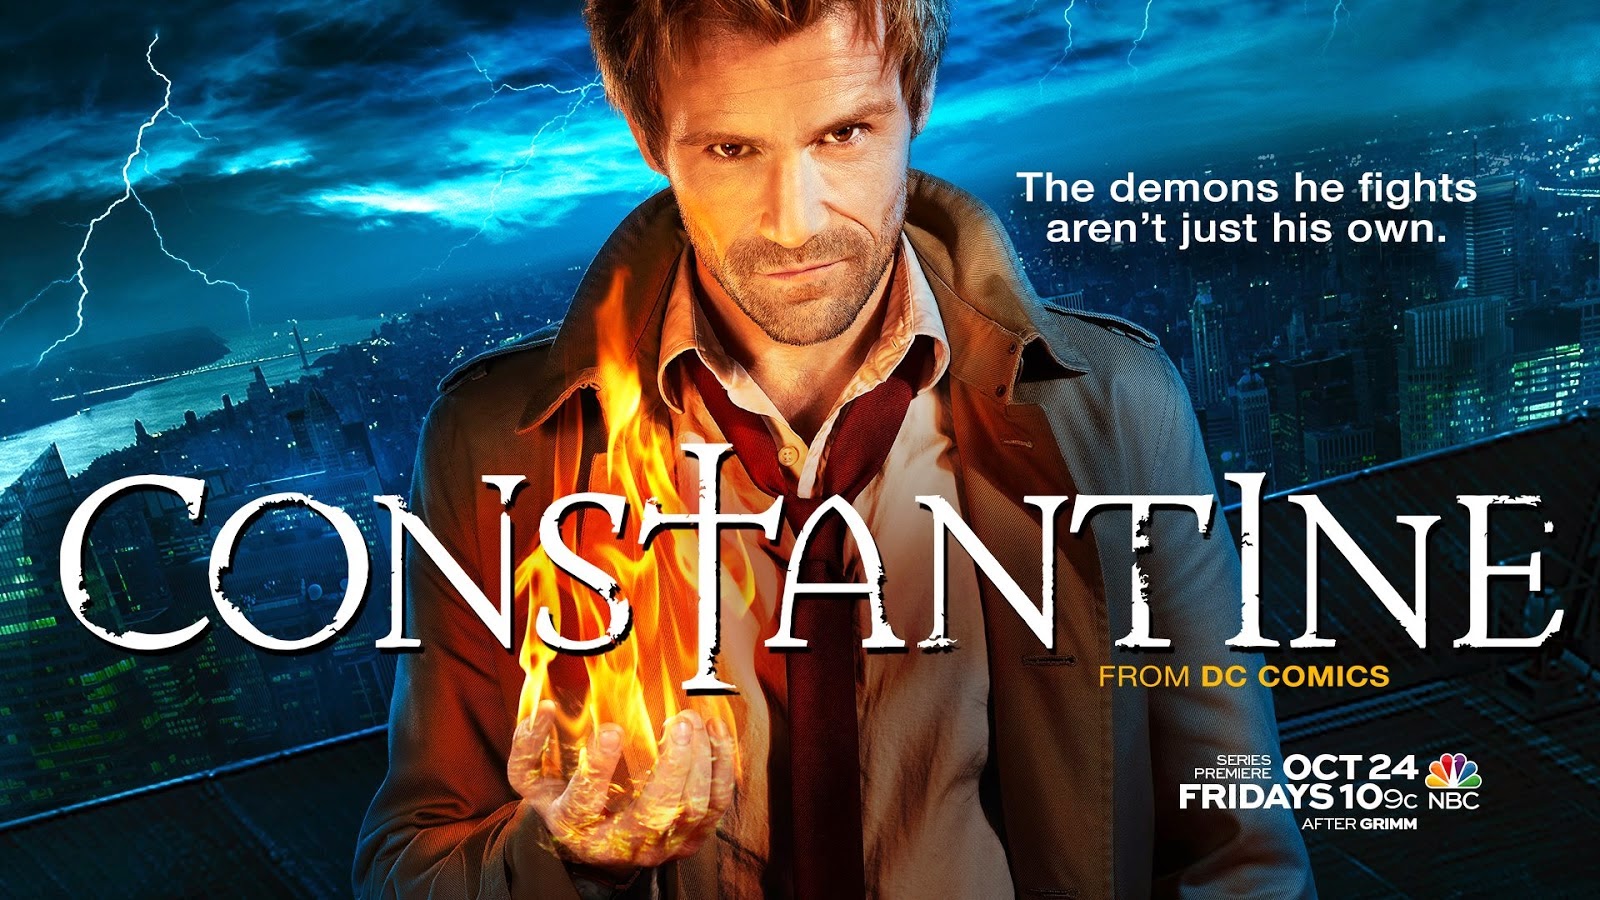 Constantine - Season 1 - 13 Episodes Only, Season 2 Still in Contention at NBC